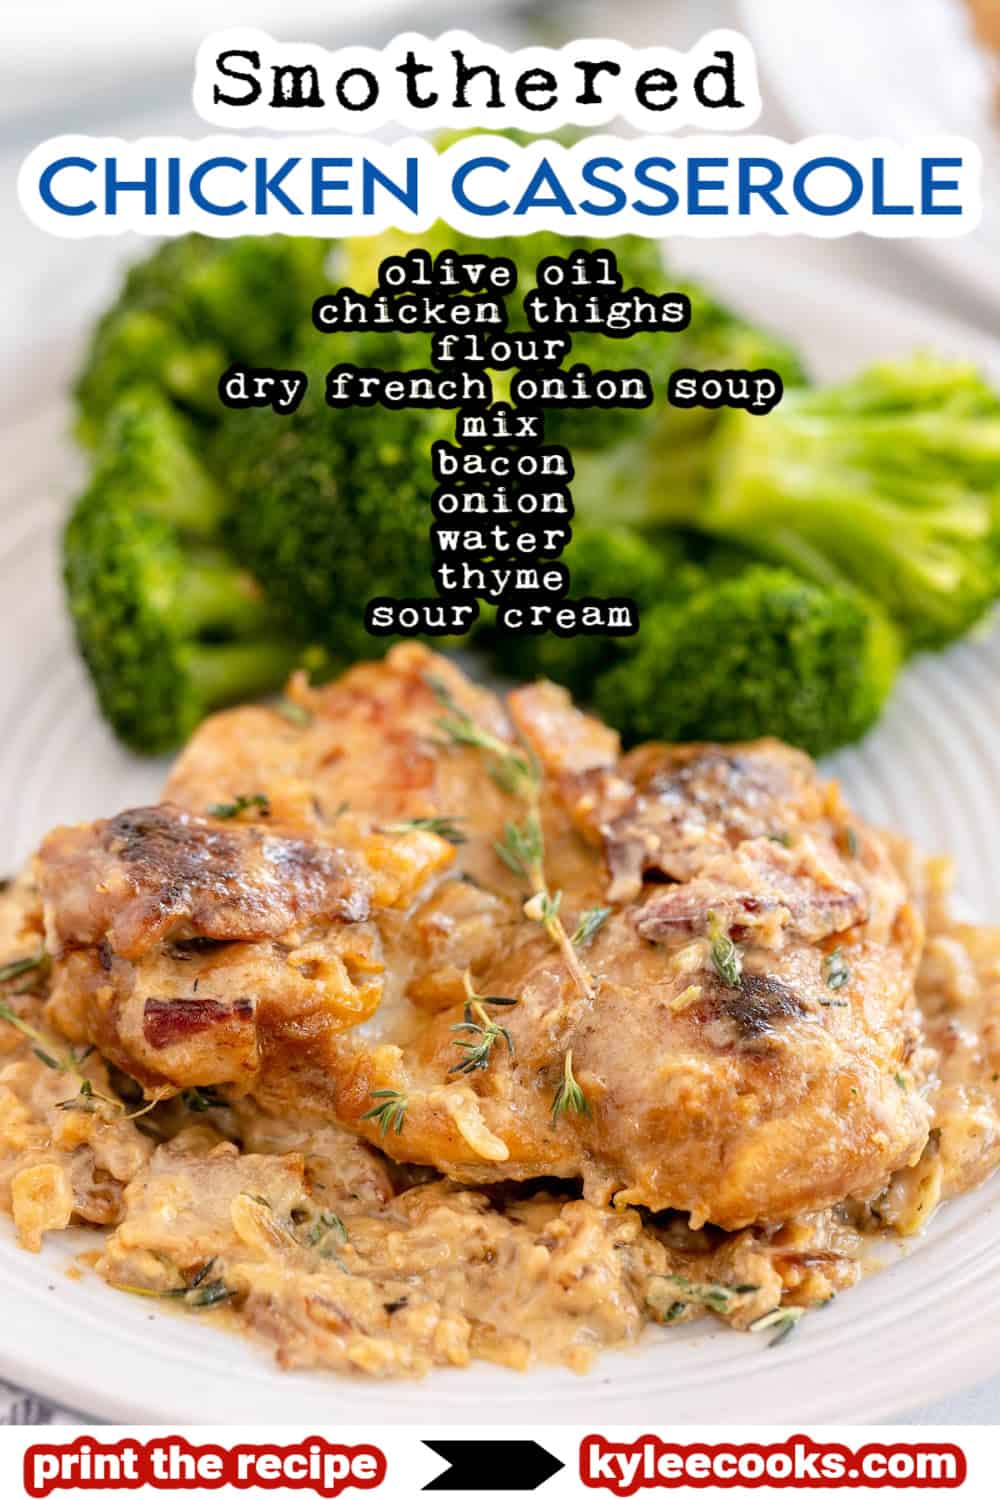 smothered chicken casserole in a white dish with a wooden spoon, recipe name overlaid in text.